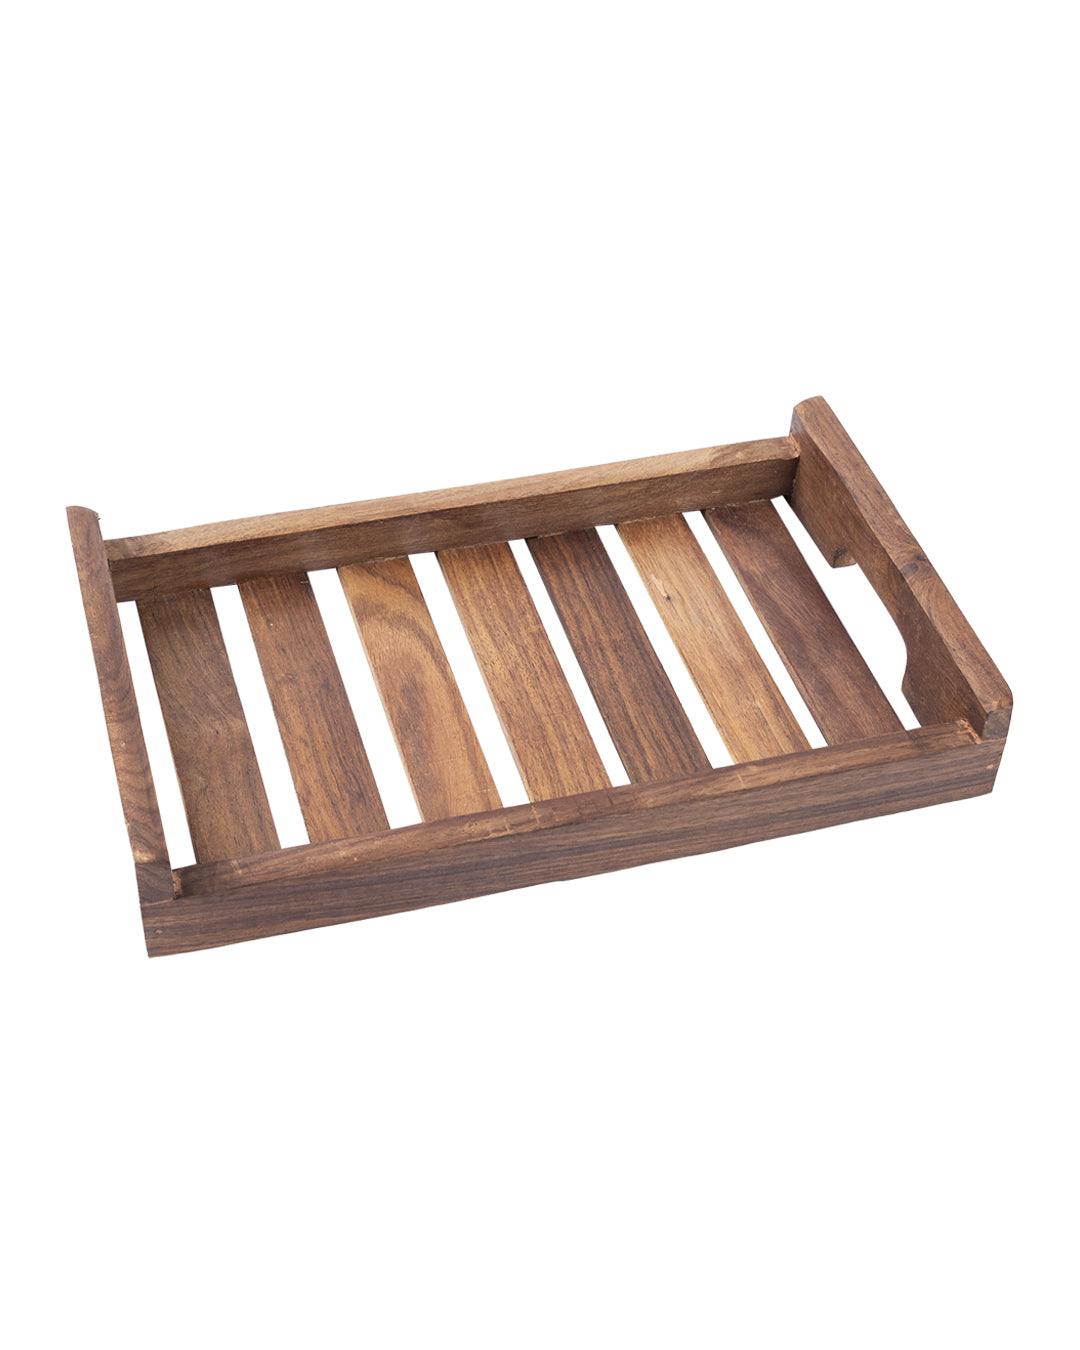 'Sheesham Wood' Handcrafted Small Serving Trays In Sheesham Wood - MARKET 99